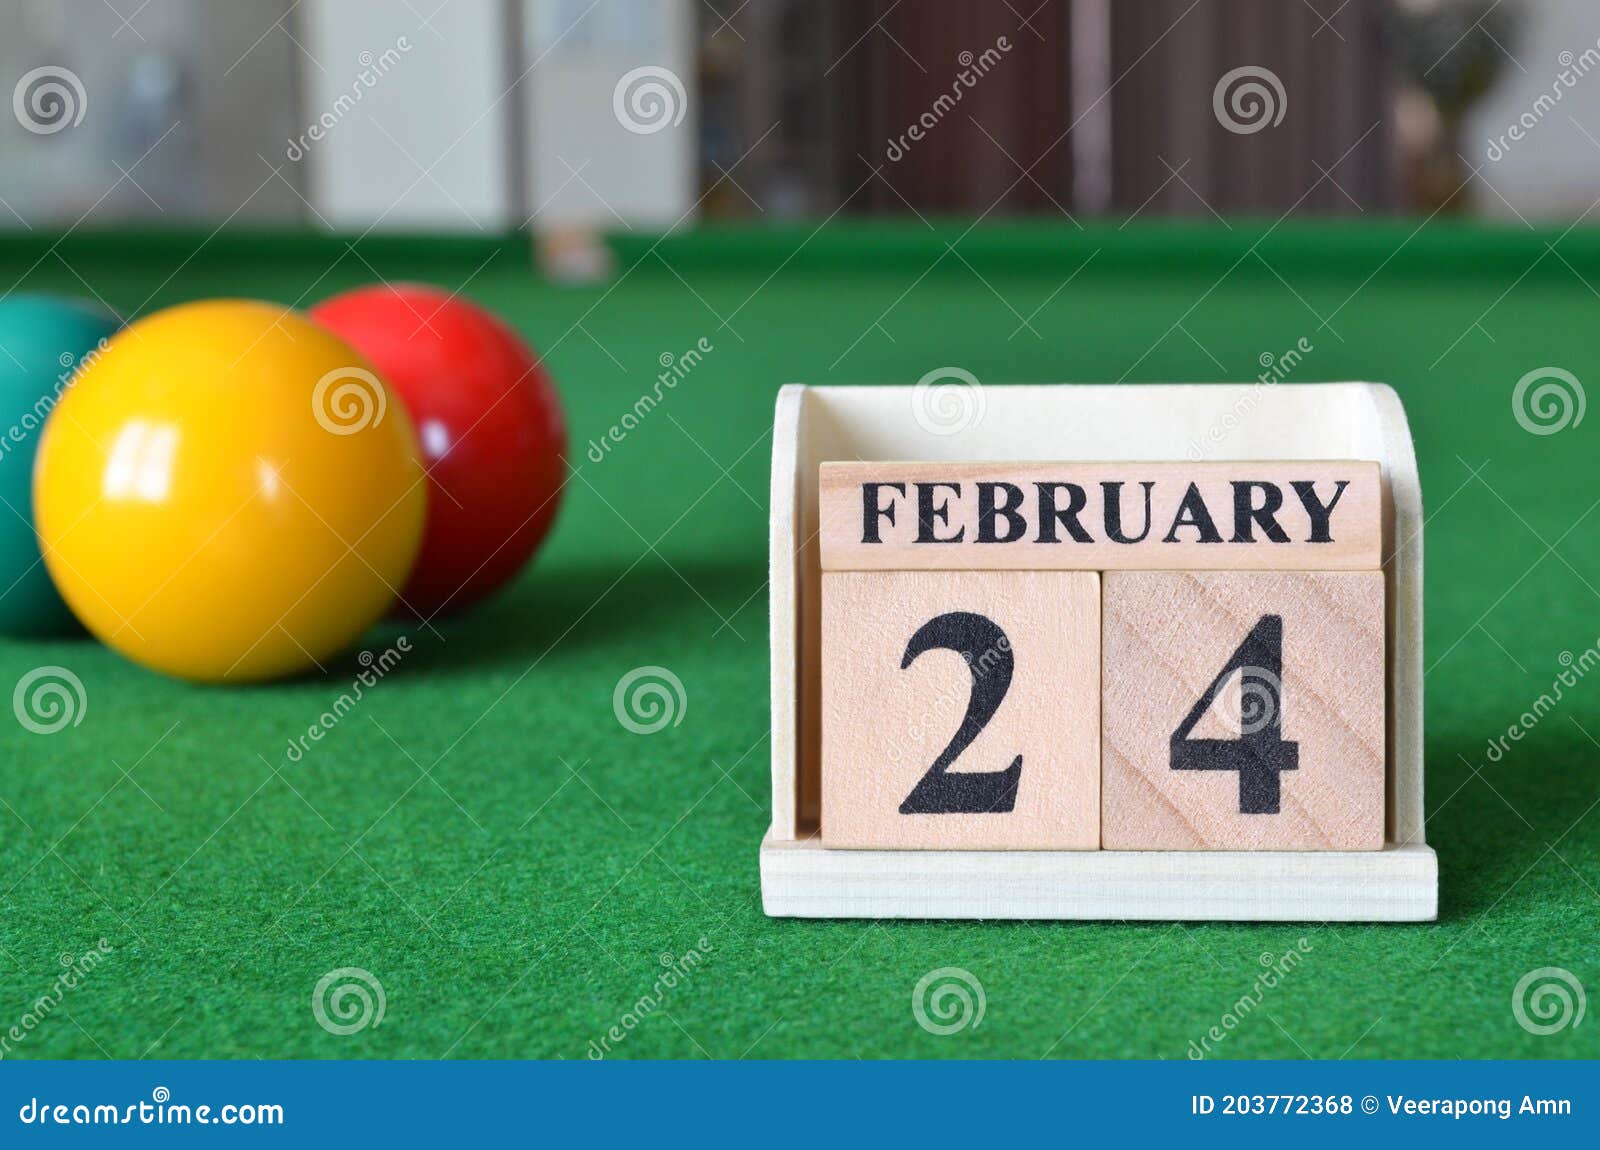 February 24, Number Cube with Balls on Snooker Table, Sport Background